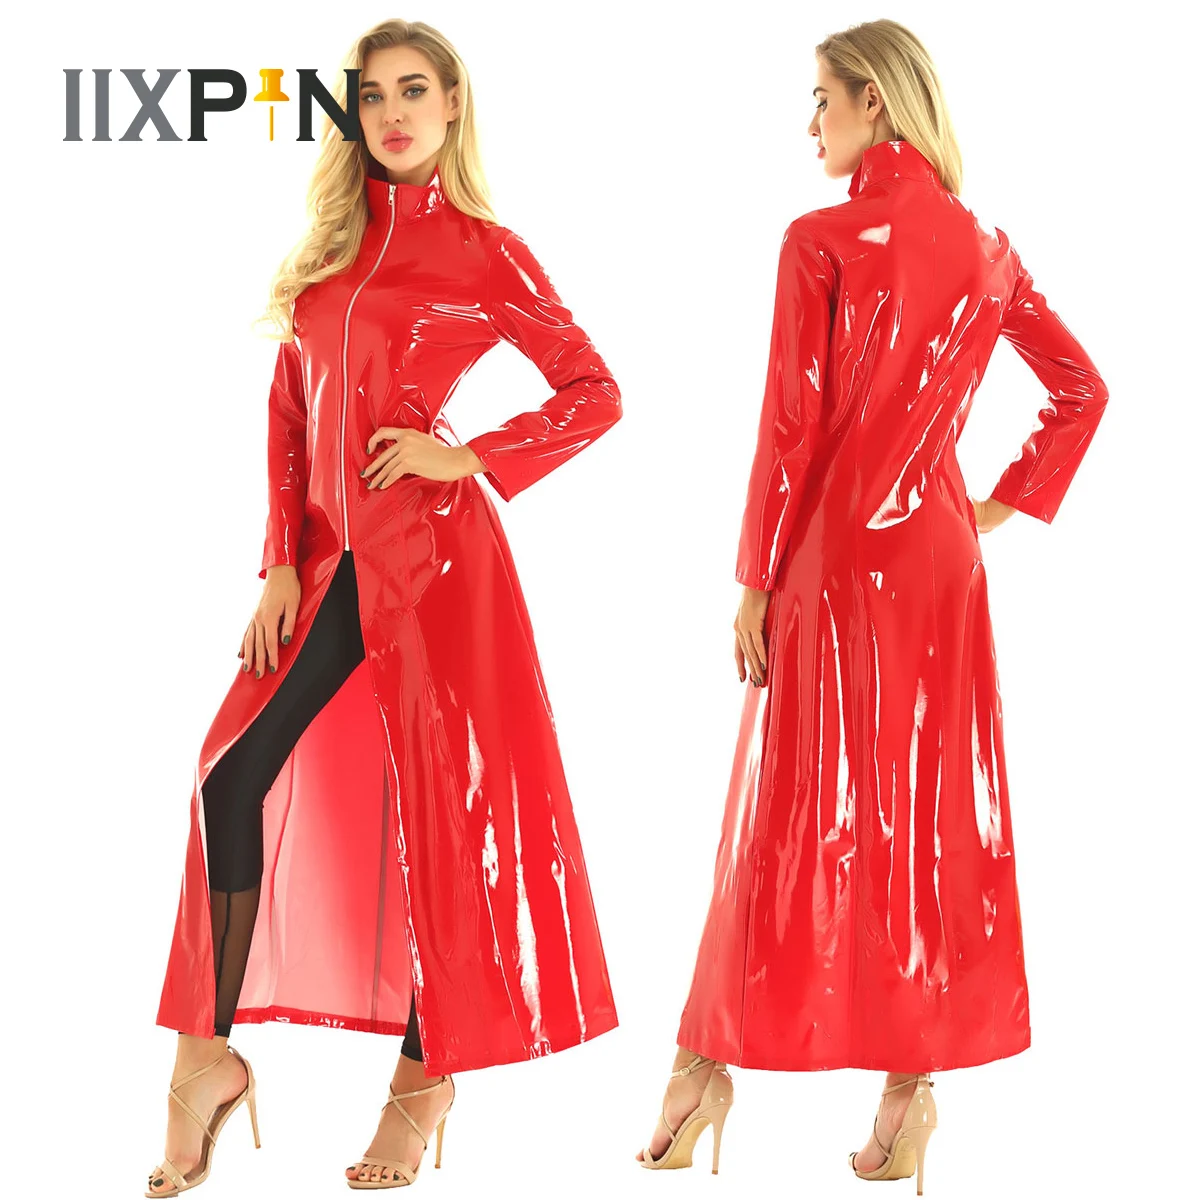 Adult PVC Leather Turtleneck Long Trench Women Wetlook Coat Jacket Sexy Zipper Front Cosplay Costume Mens Dance Party Clubwear